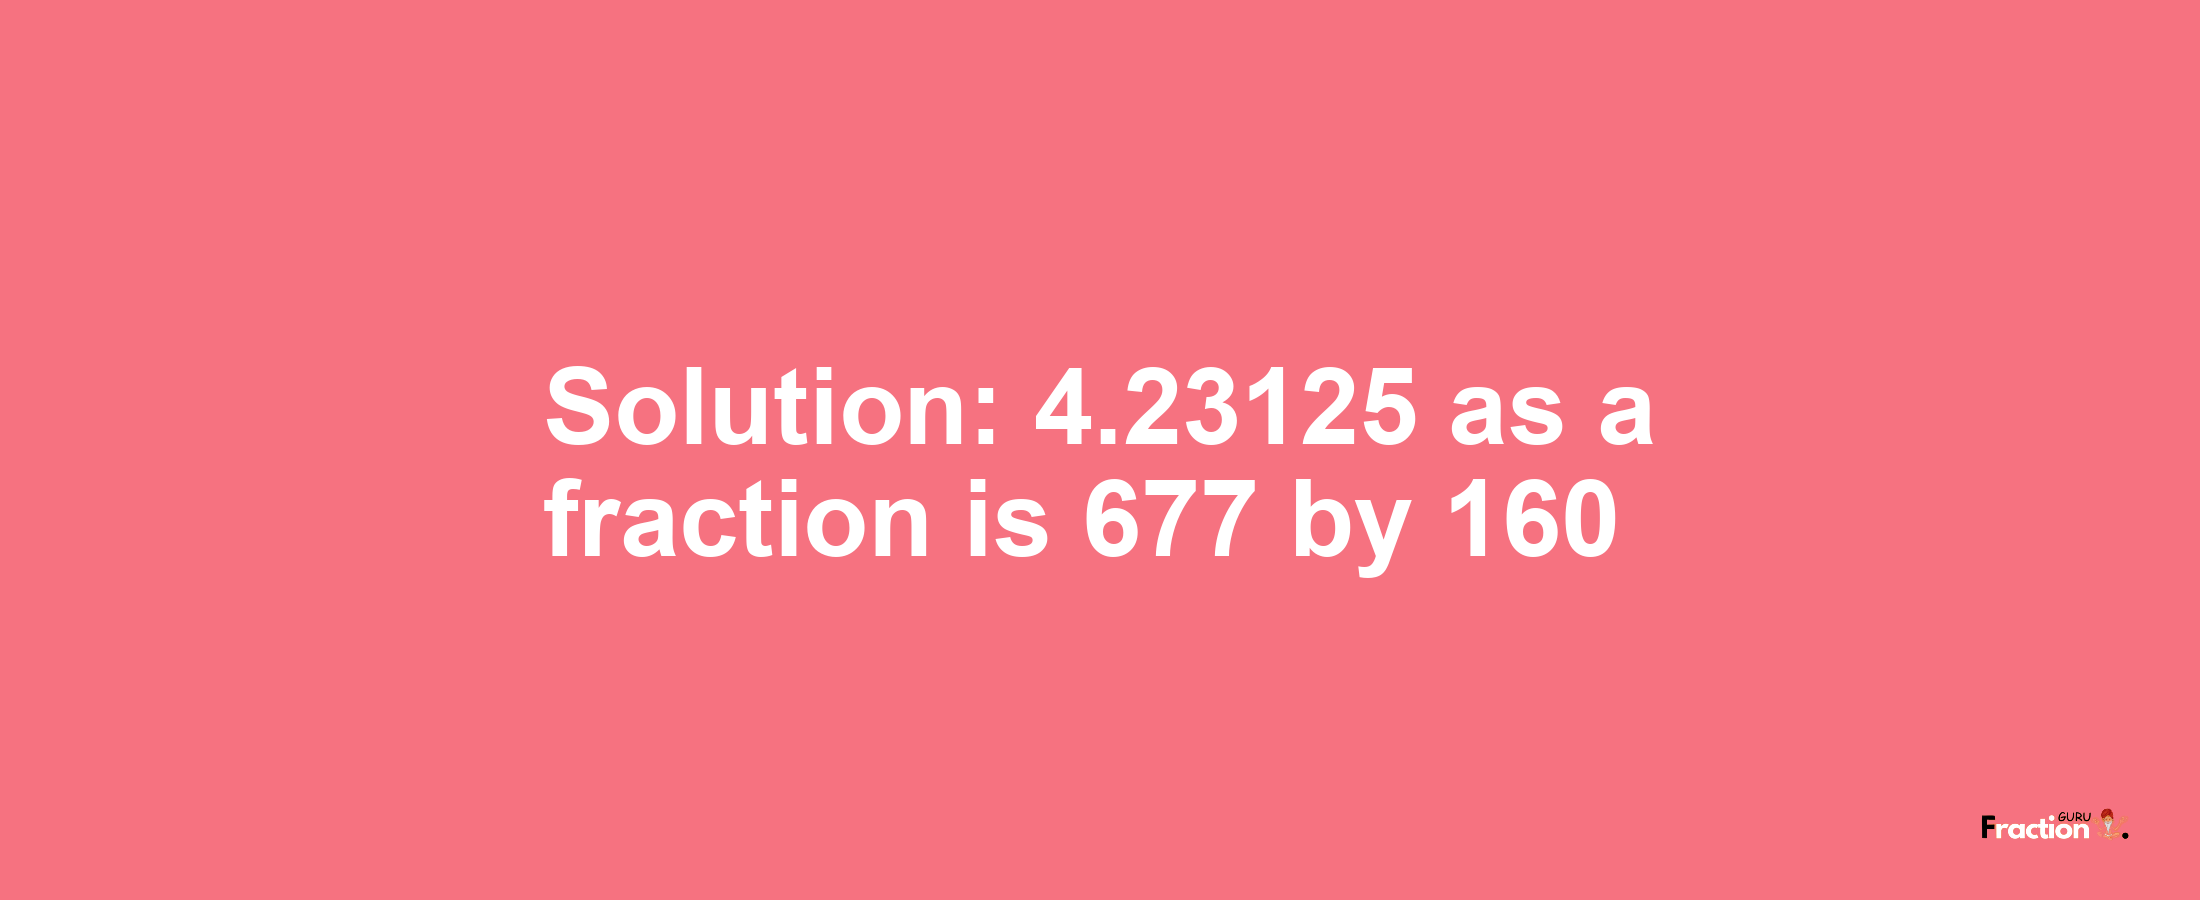 Solution:4.23125 as a fraction is 677/160